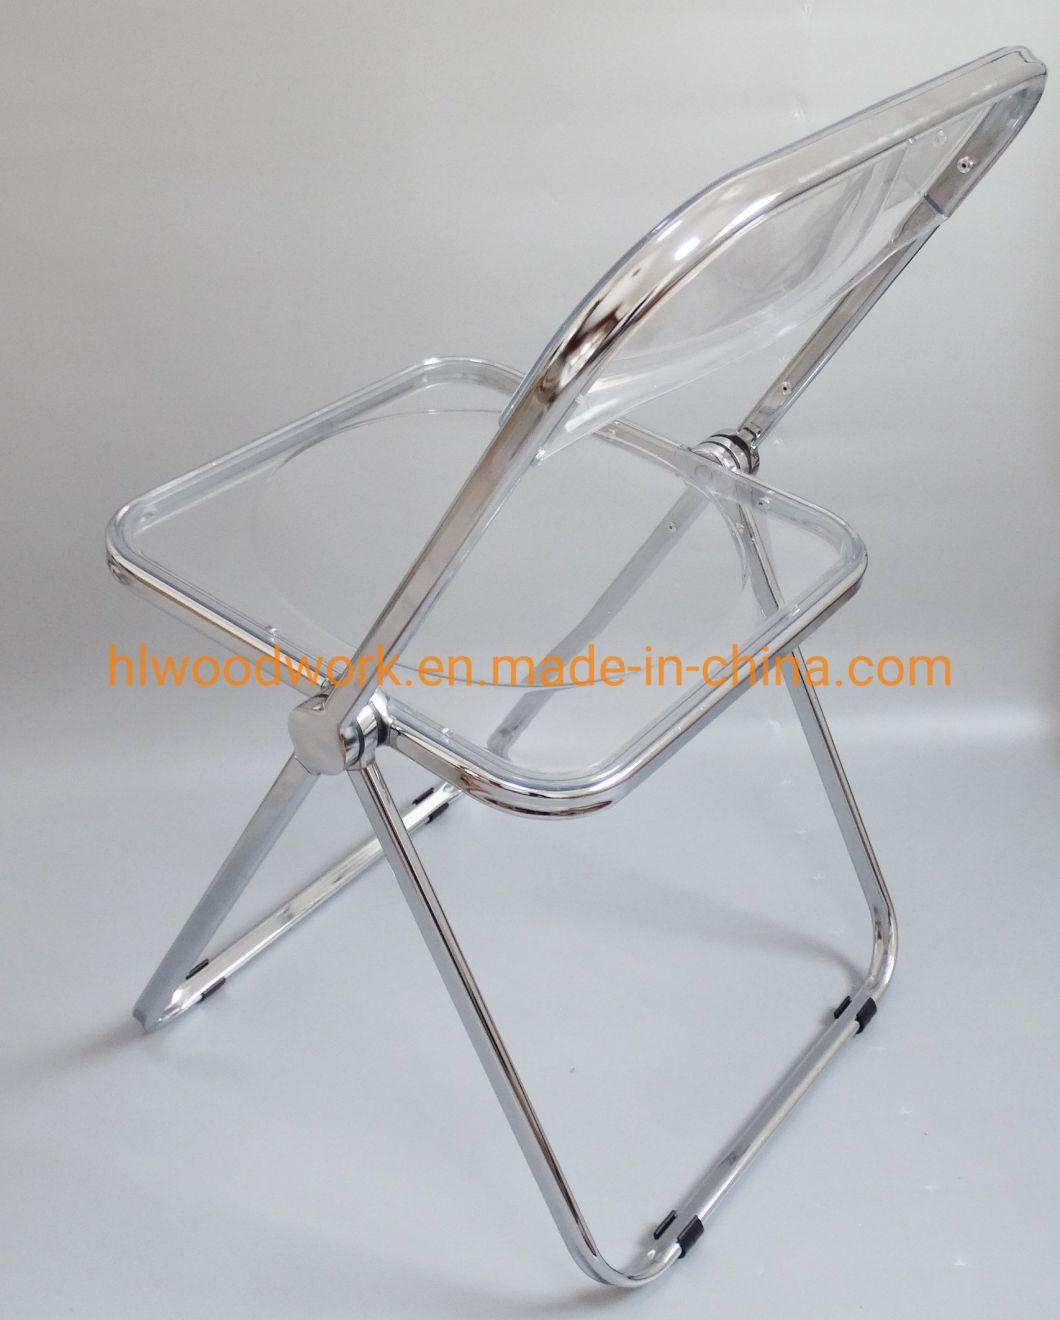 Modern Design Office/Bar/Dining/Leisure/Banquet/Wedding/Meeting Folding Plastic Chair in Chrome Frame Transparent Clear PC Plastic Dining Chair Transparent